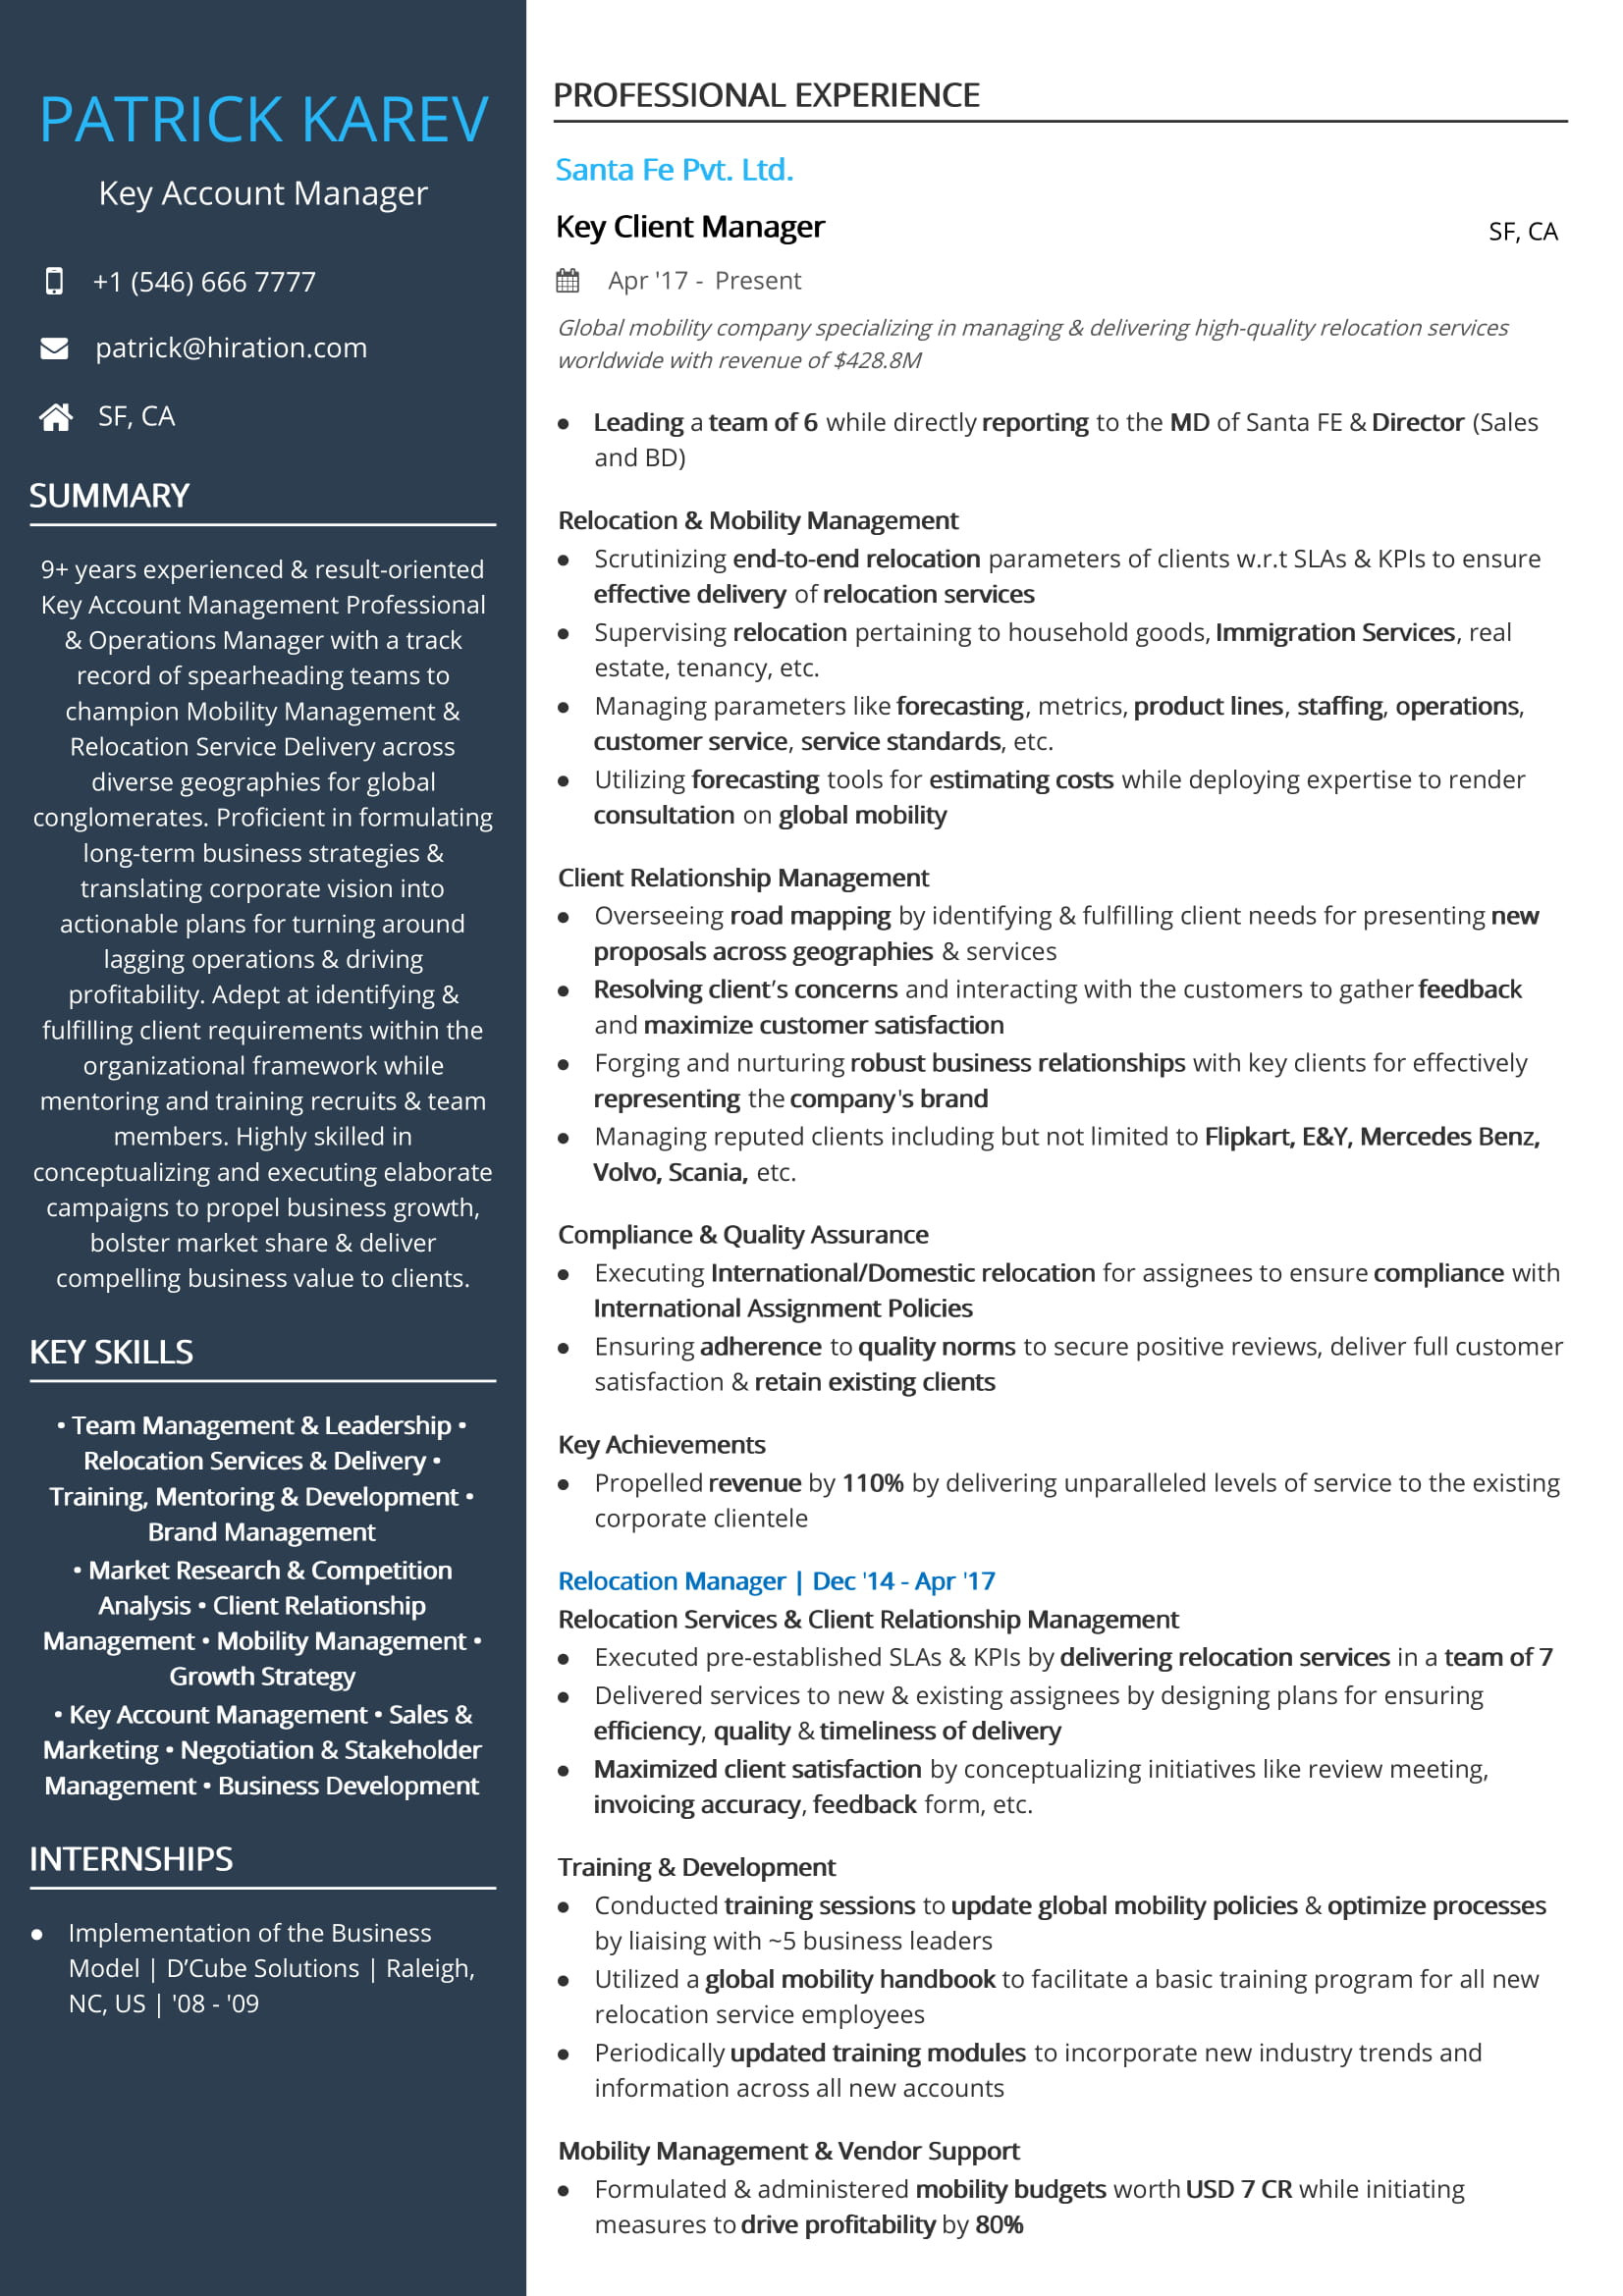 Free Sample Resume for Account Manager Free Key Account Manager Resume Sample 2020 by Hiration